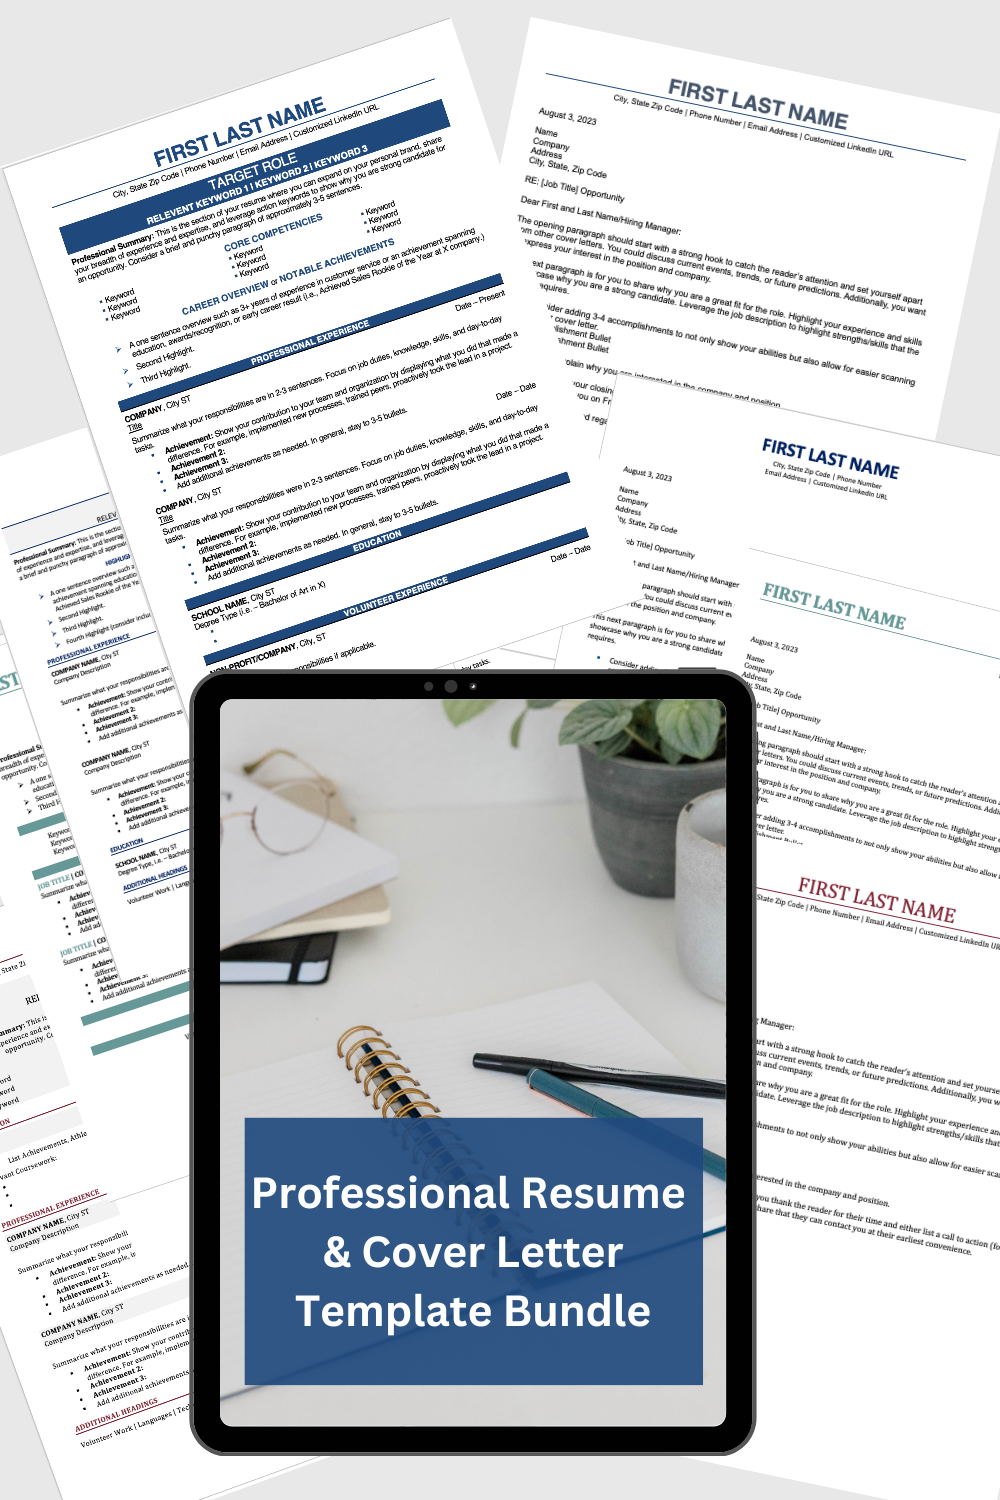 Professional Resume & Cover Letter Template Bundle